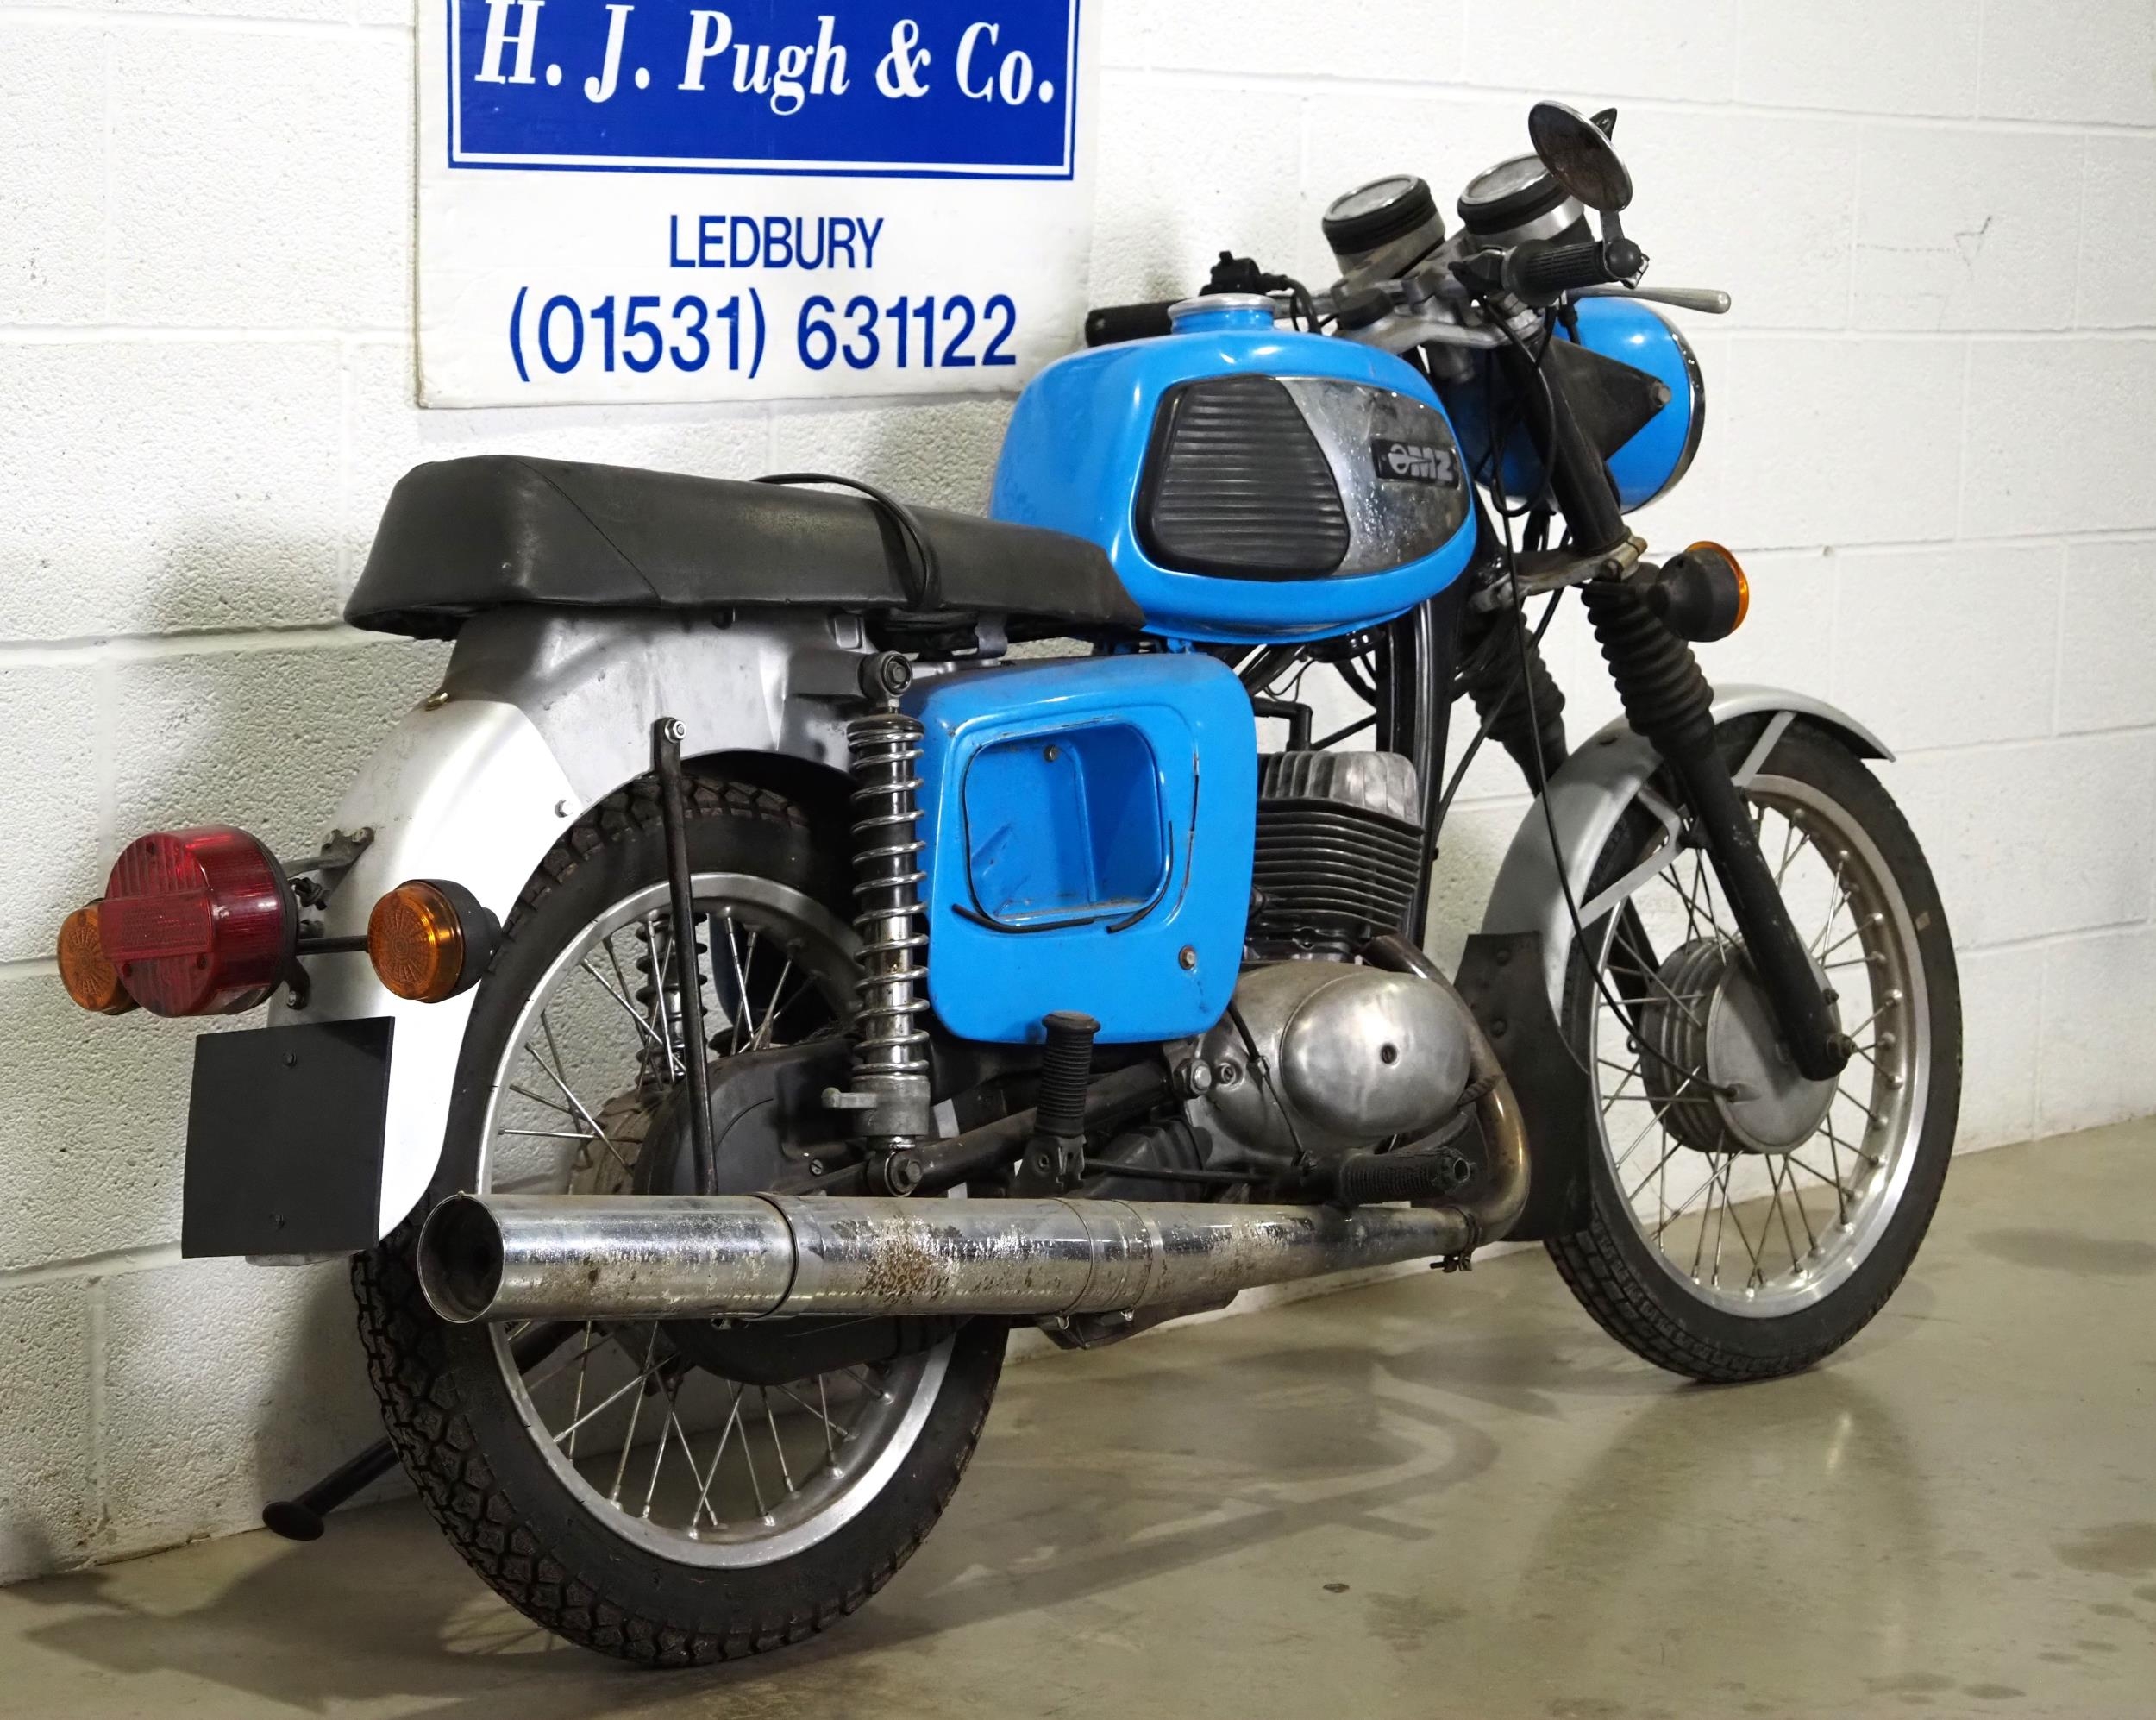 MZ TS125 Motorcycle. 1985. 125cc. Frame no. 8858357 Engine no. 6605216 Been in storage, engine turns - Image 3 of 6